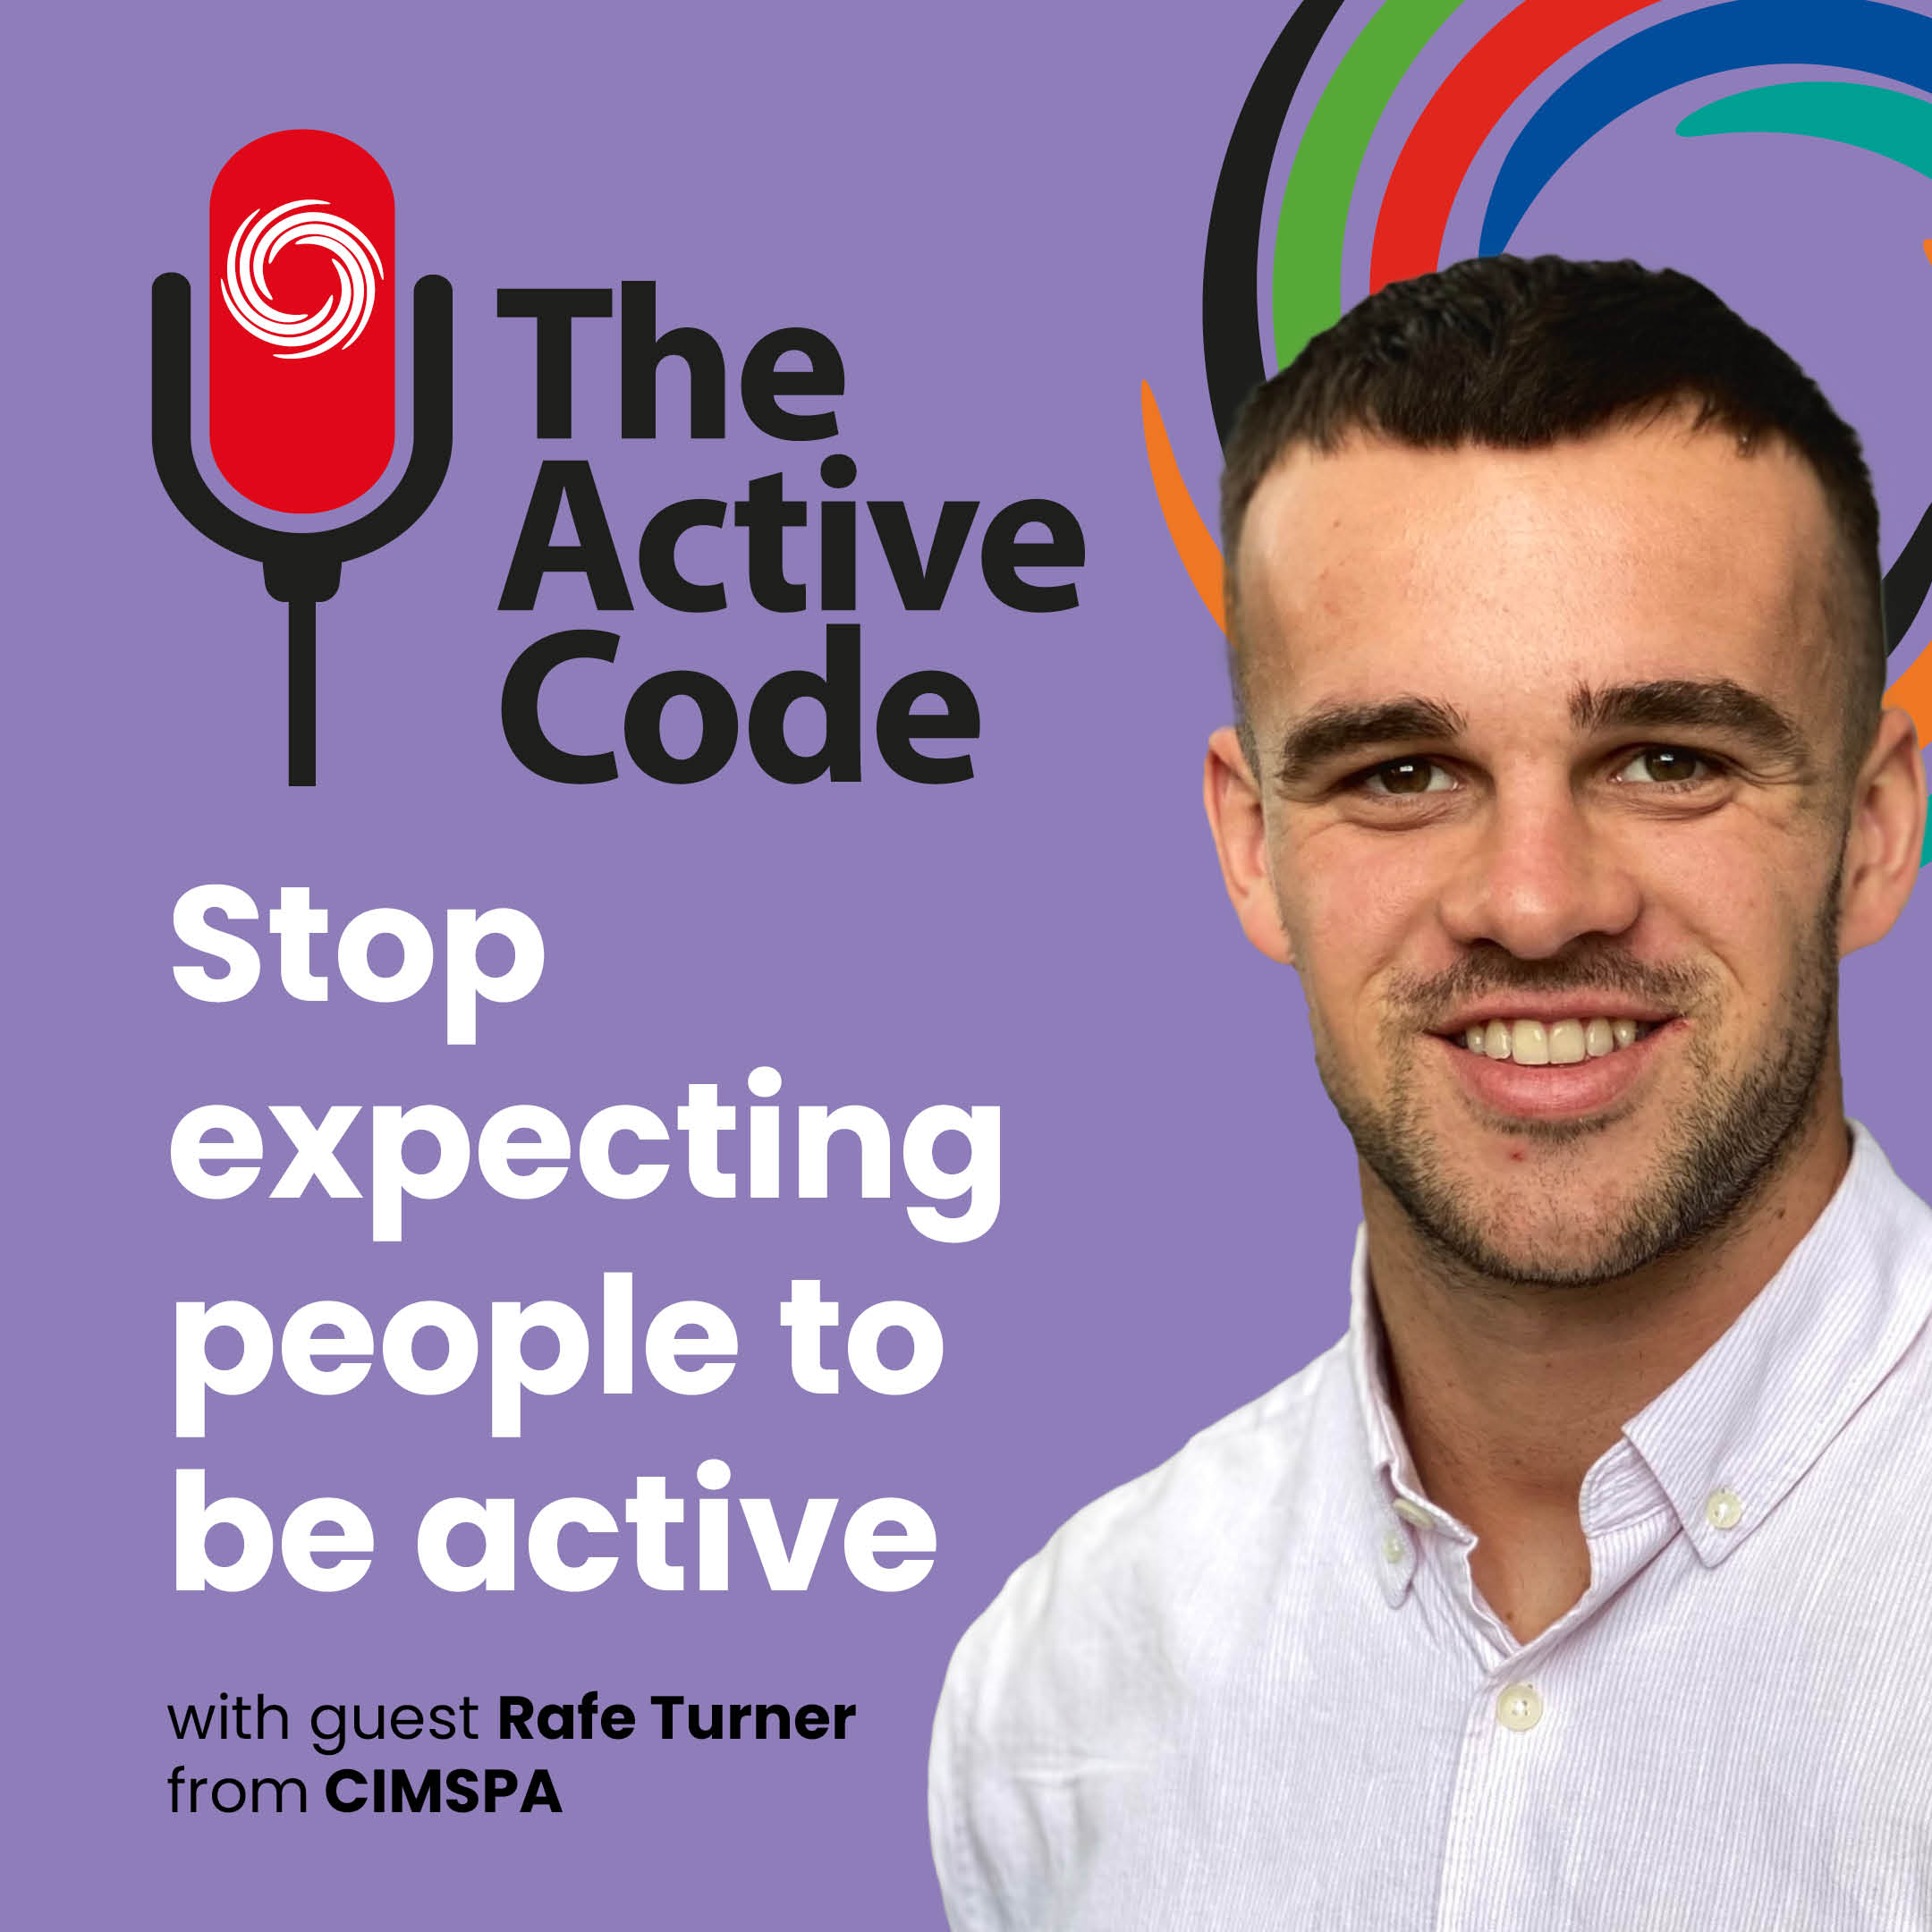 The Active Code – Stop expecting people to be active